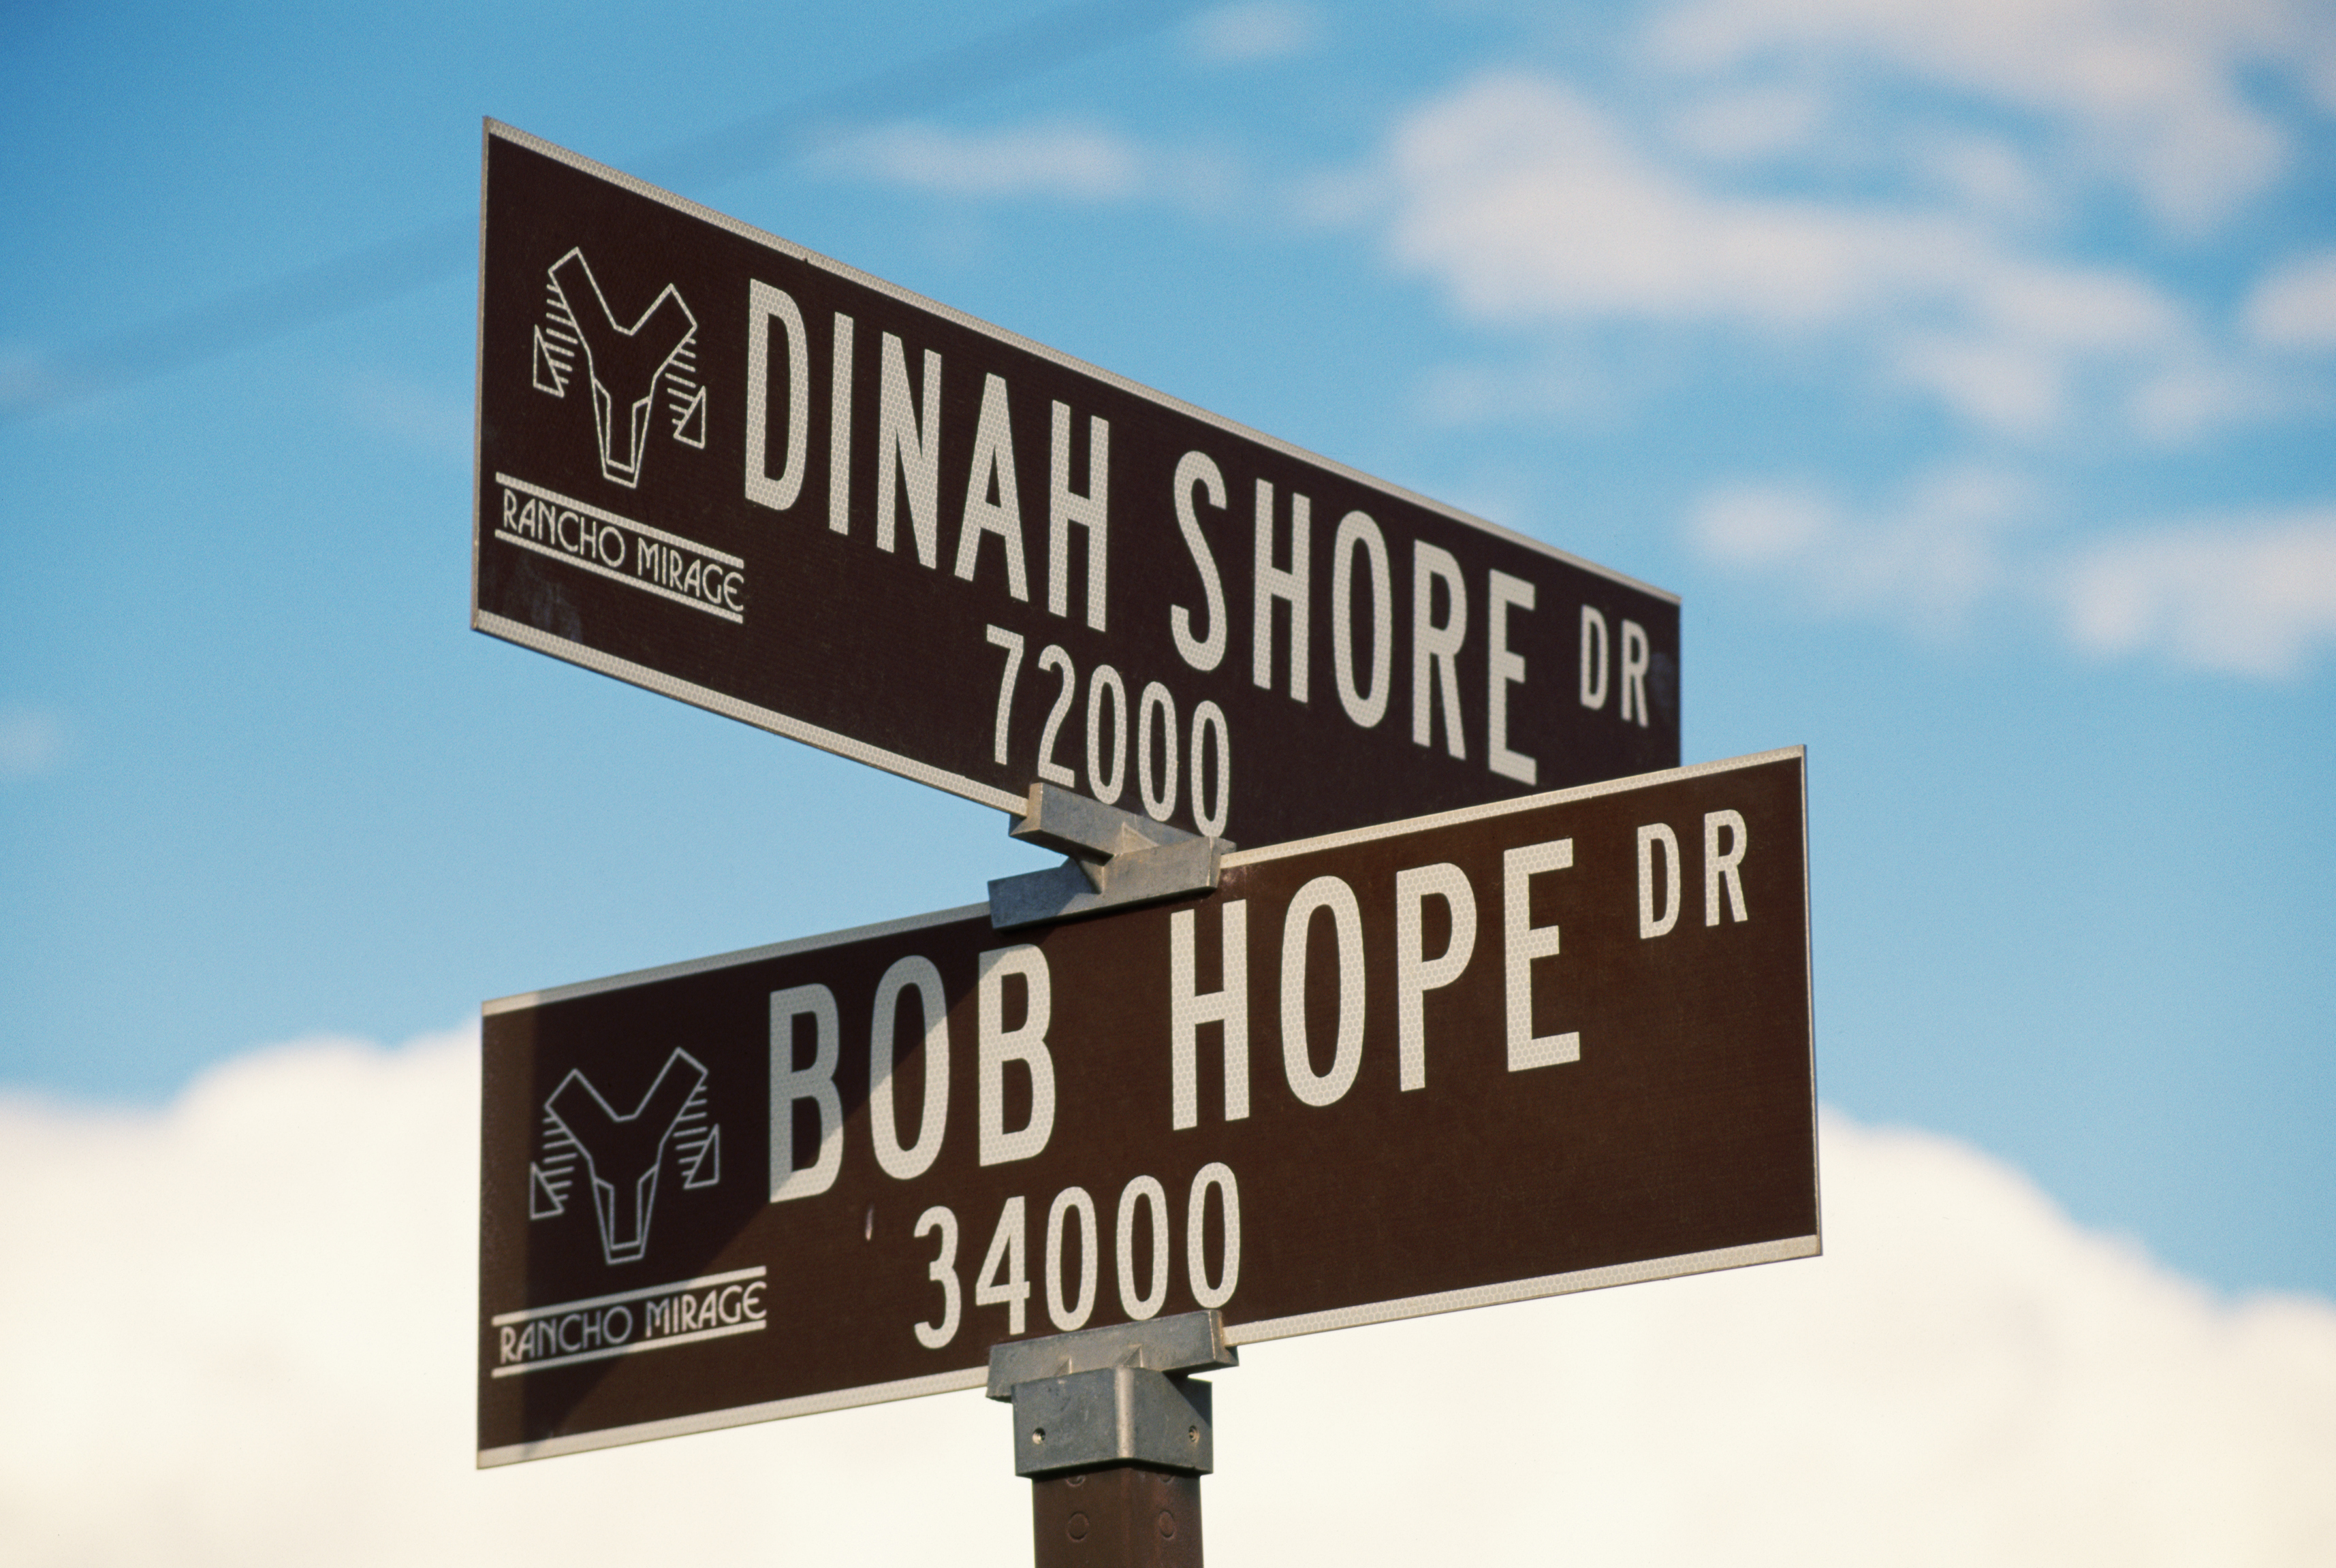 Intersection signpost for Dinah Shore Dr and Bob Hope Dr against a clear sky